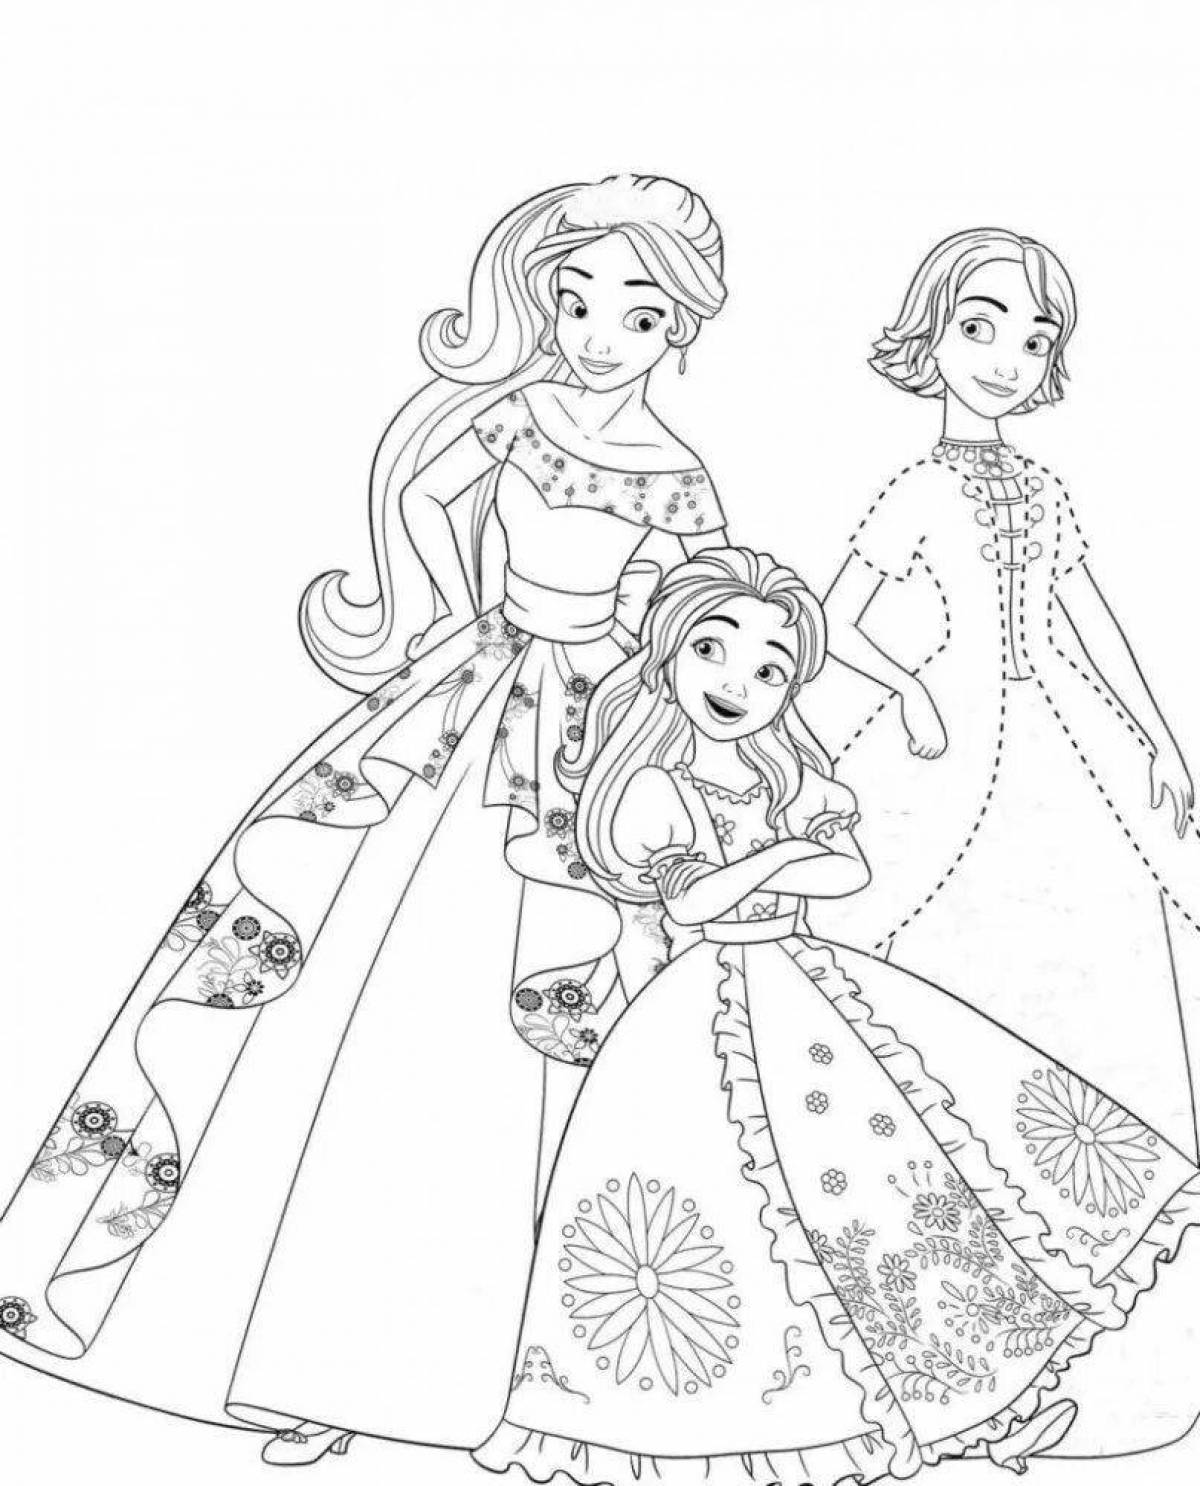 Awesome elena lovely coloring book